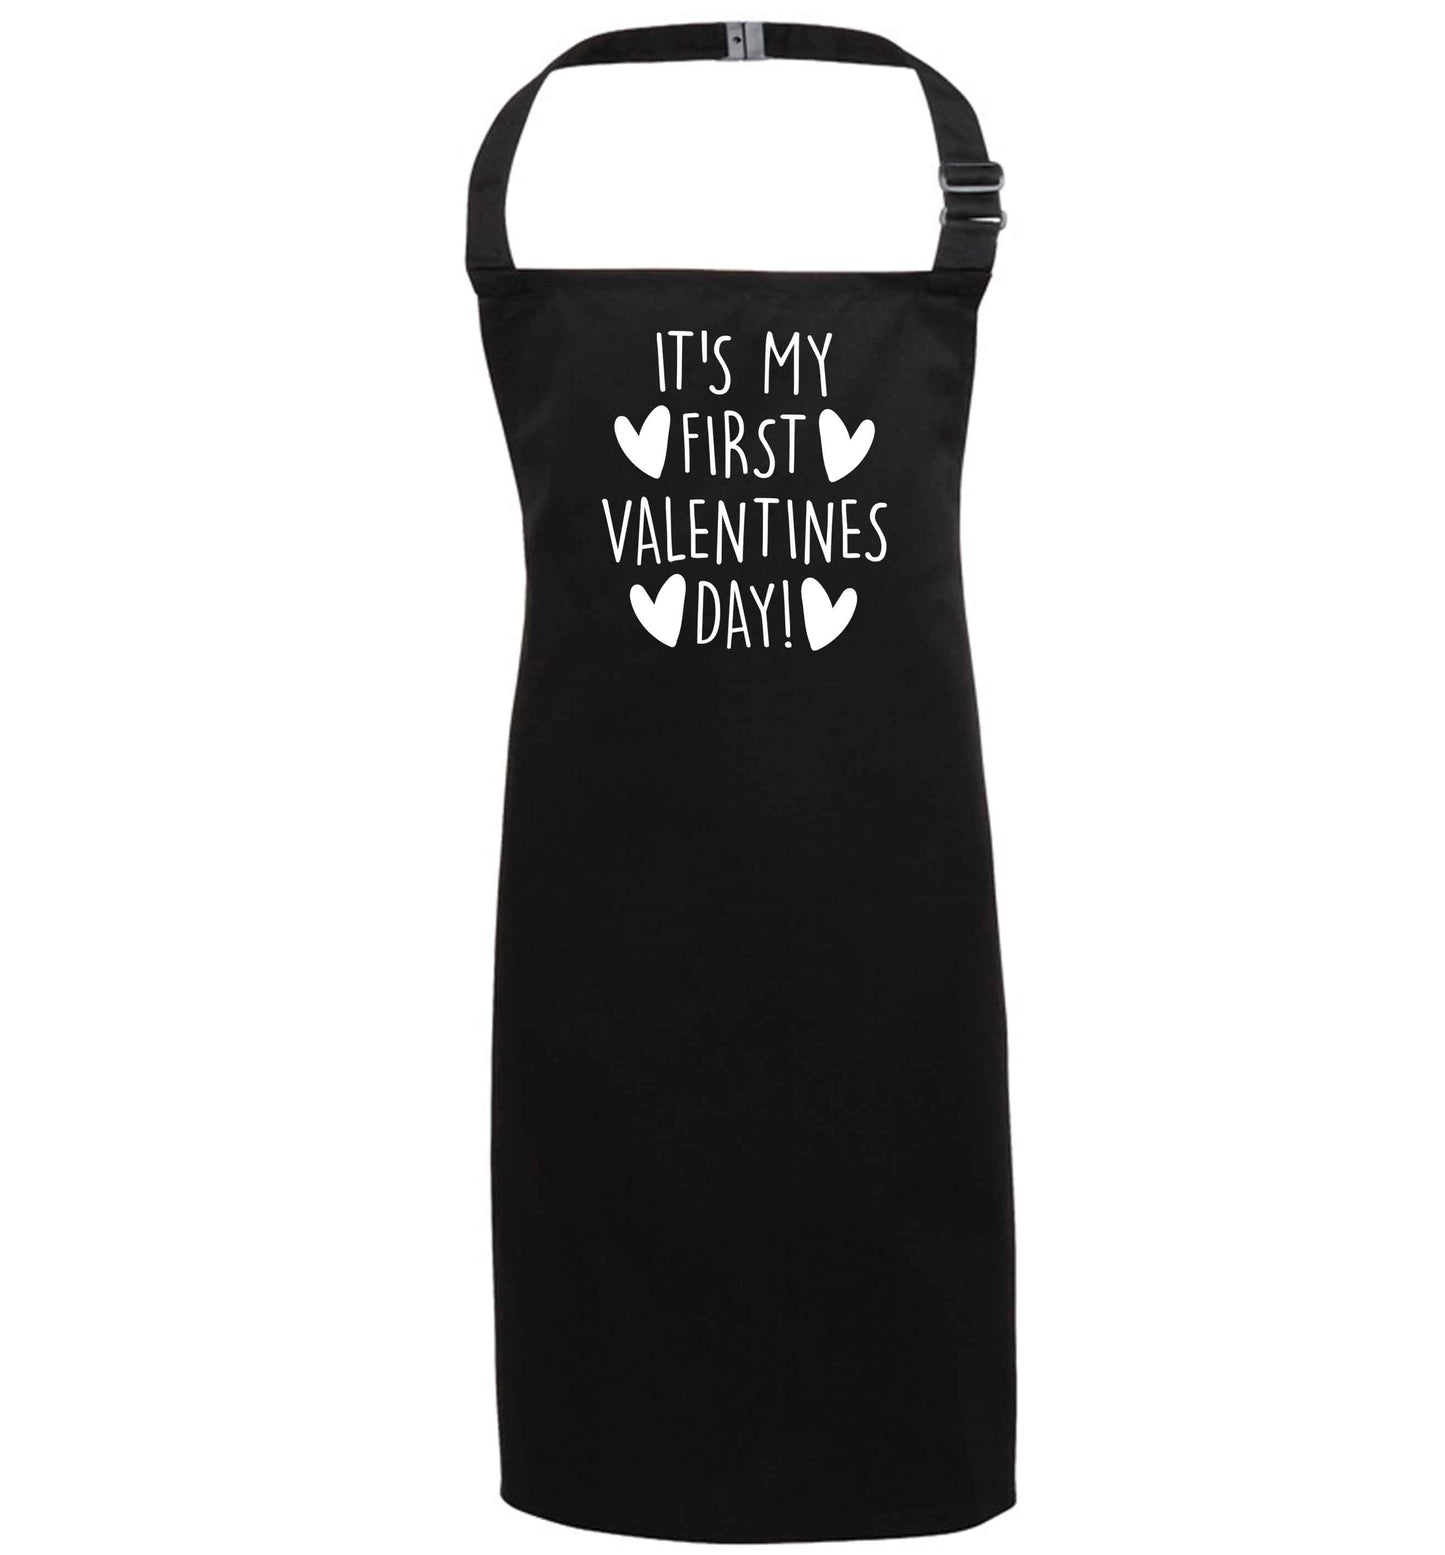 It's my first valentines day! black apron 7-10 years